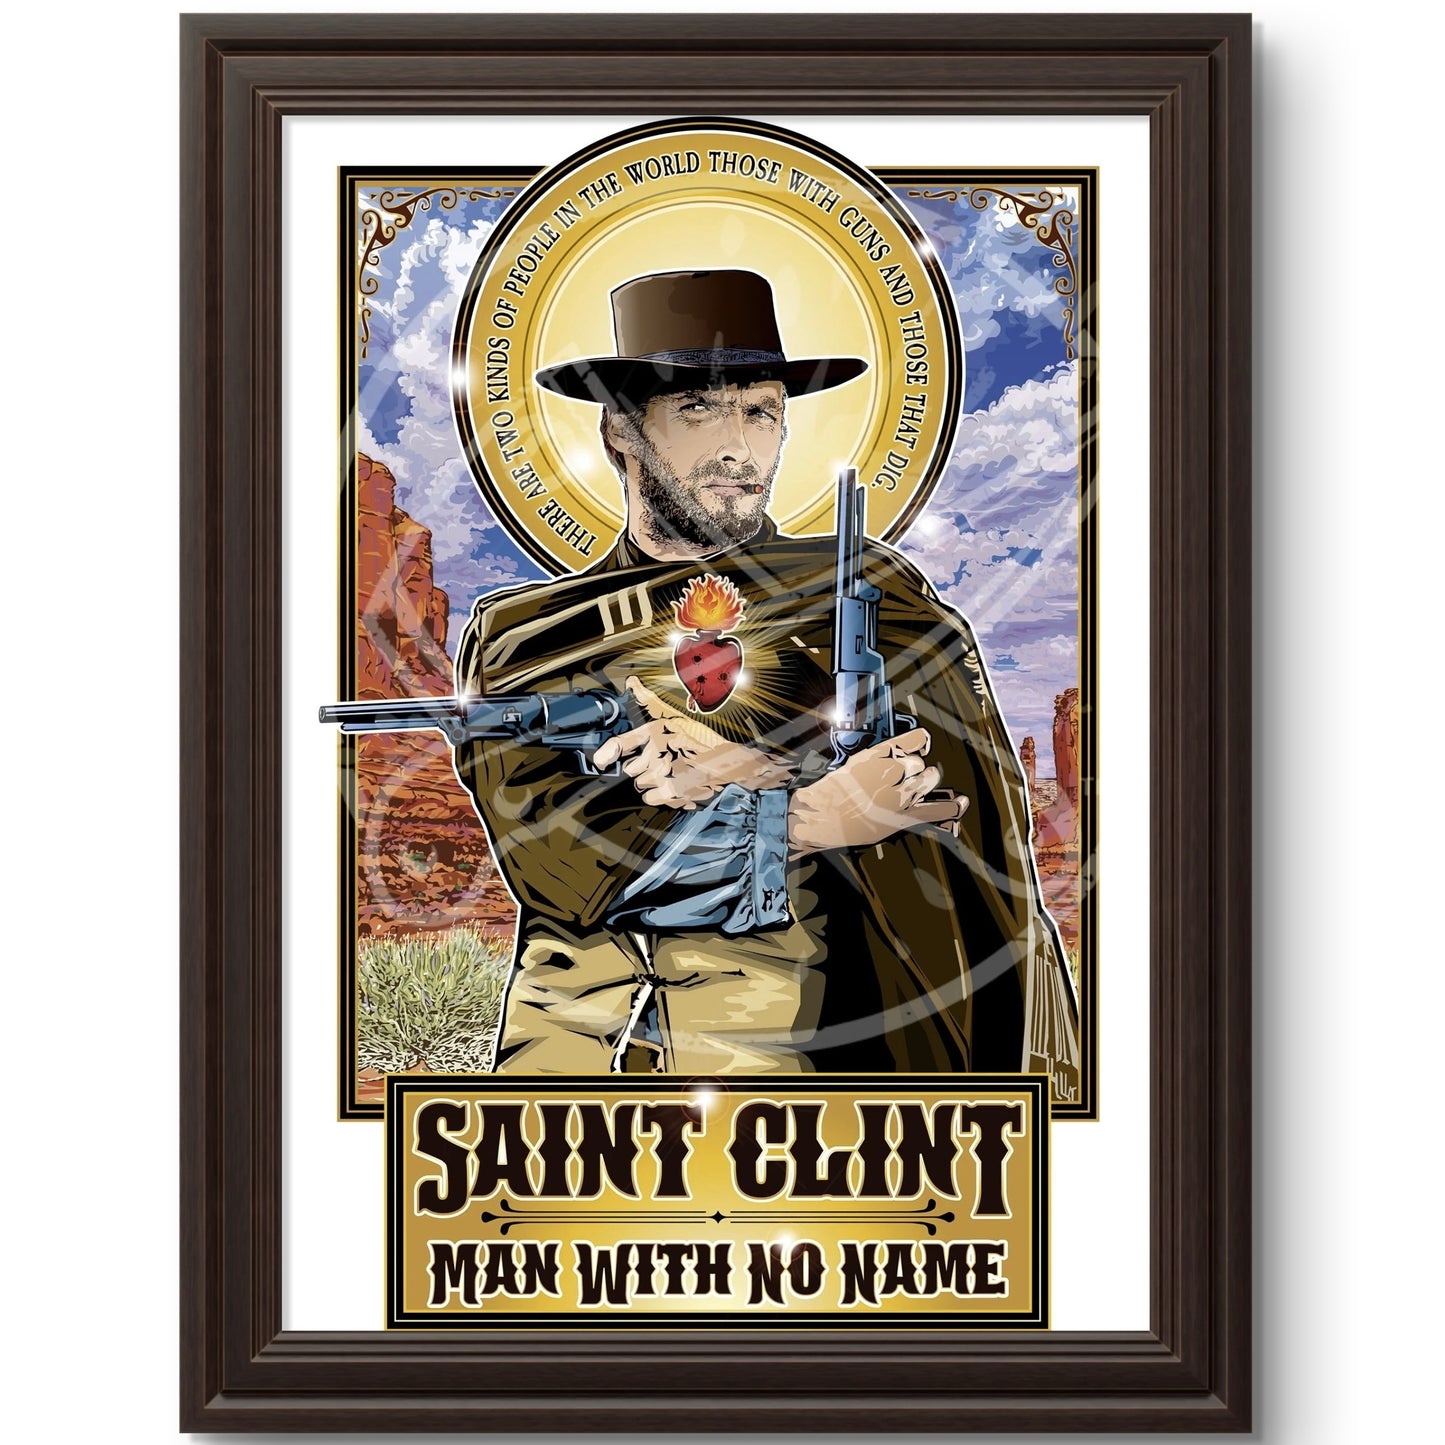 Saint Clint Man With No Name Poster